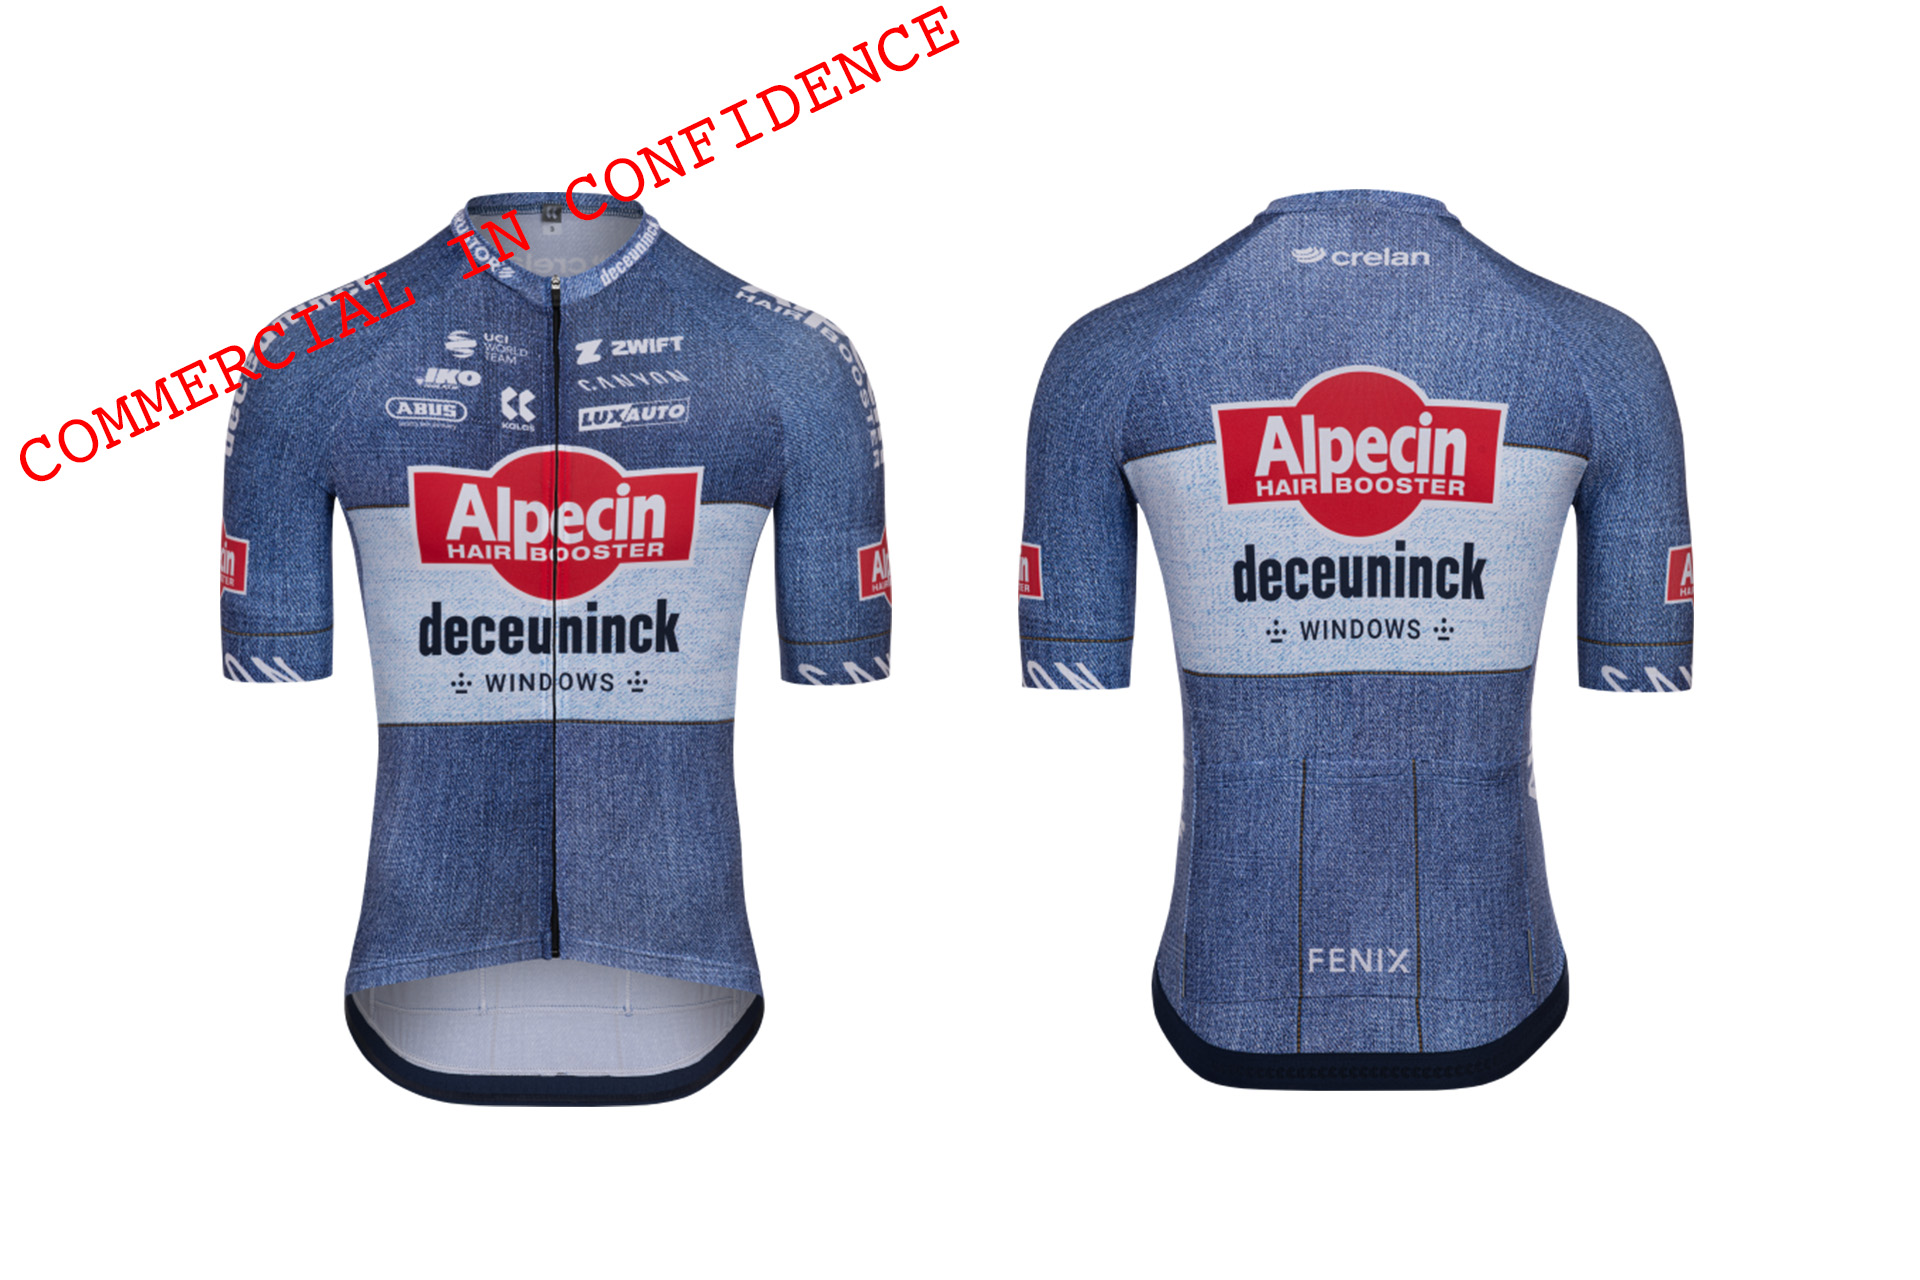 Render of new Alpecin Deceuninck kit, which looks exactly like a blend of Soudal-Quickstep and Carrera kits. 